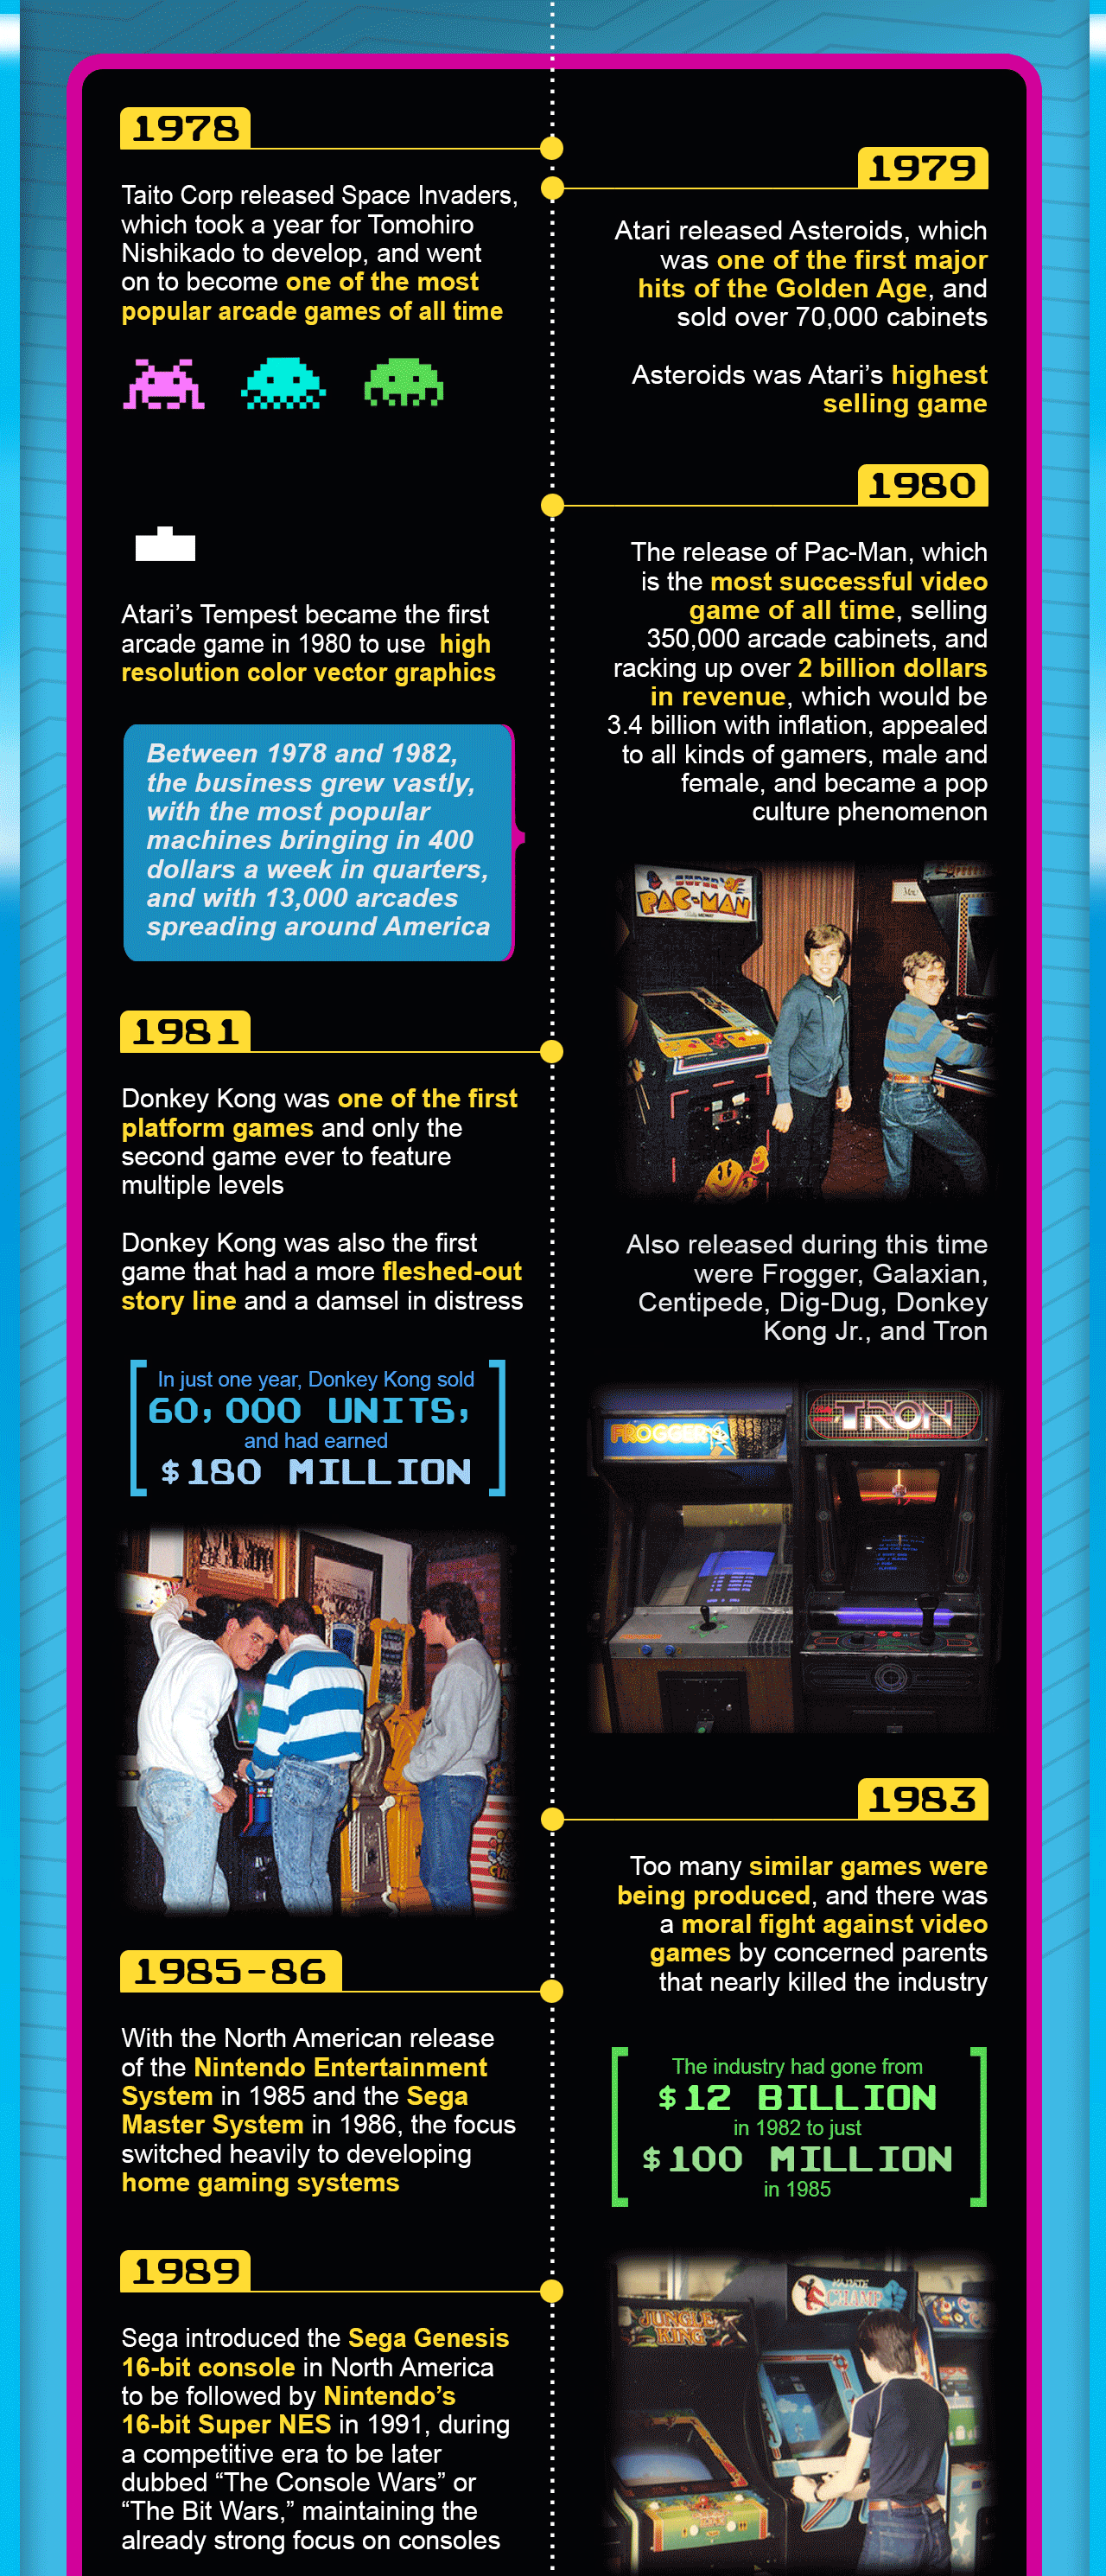 Timeline Arcade - York, Pa - The day was October 8th 1992! The arcades  wheeled out a Midway Arcade Fighting Game like no other. Special  combination moves, blood and fatalities. It kept